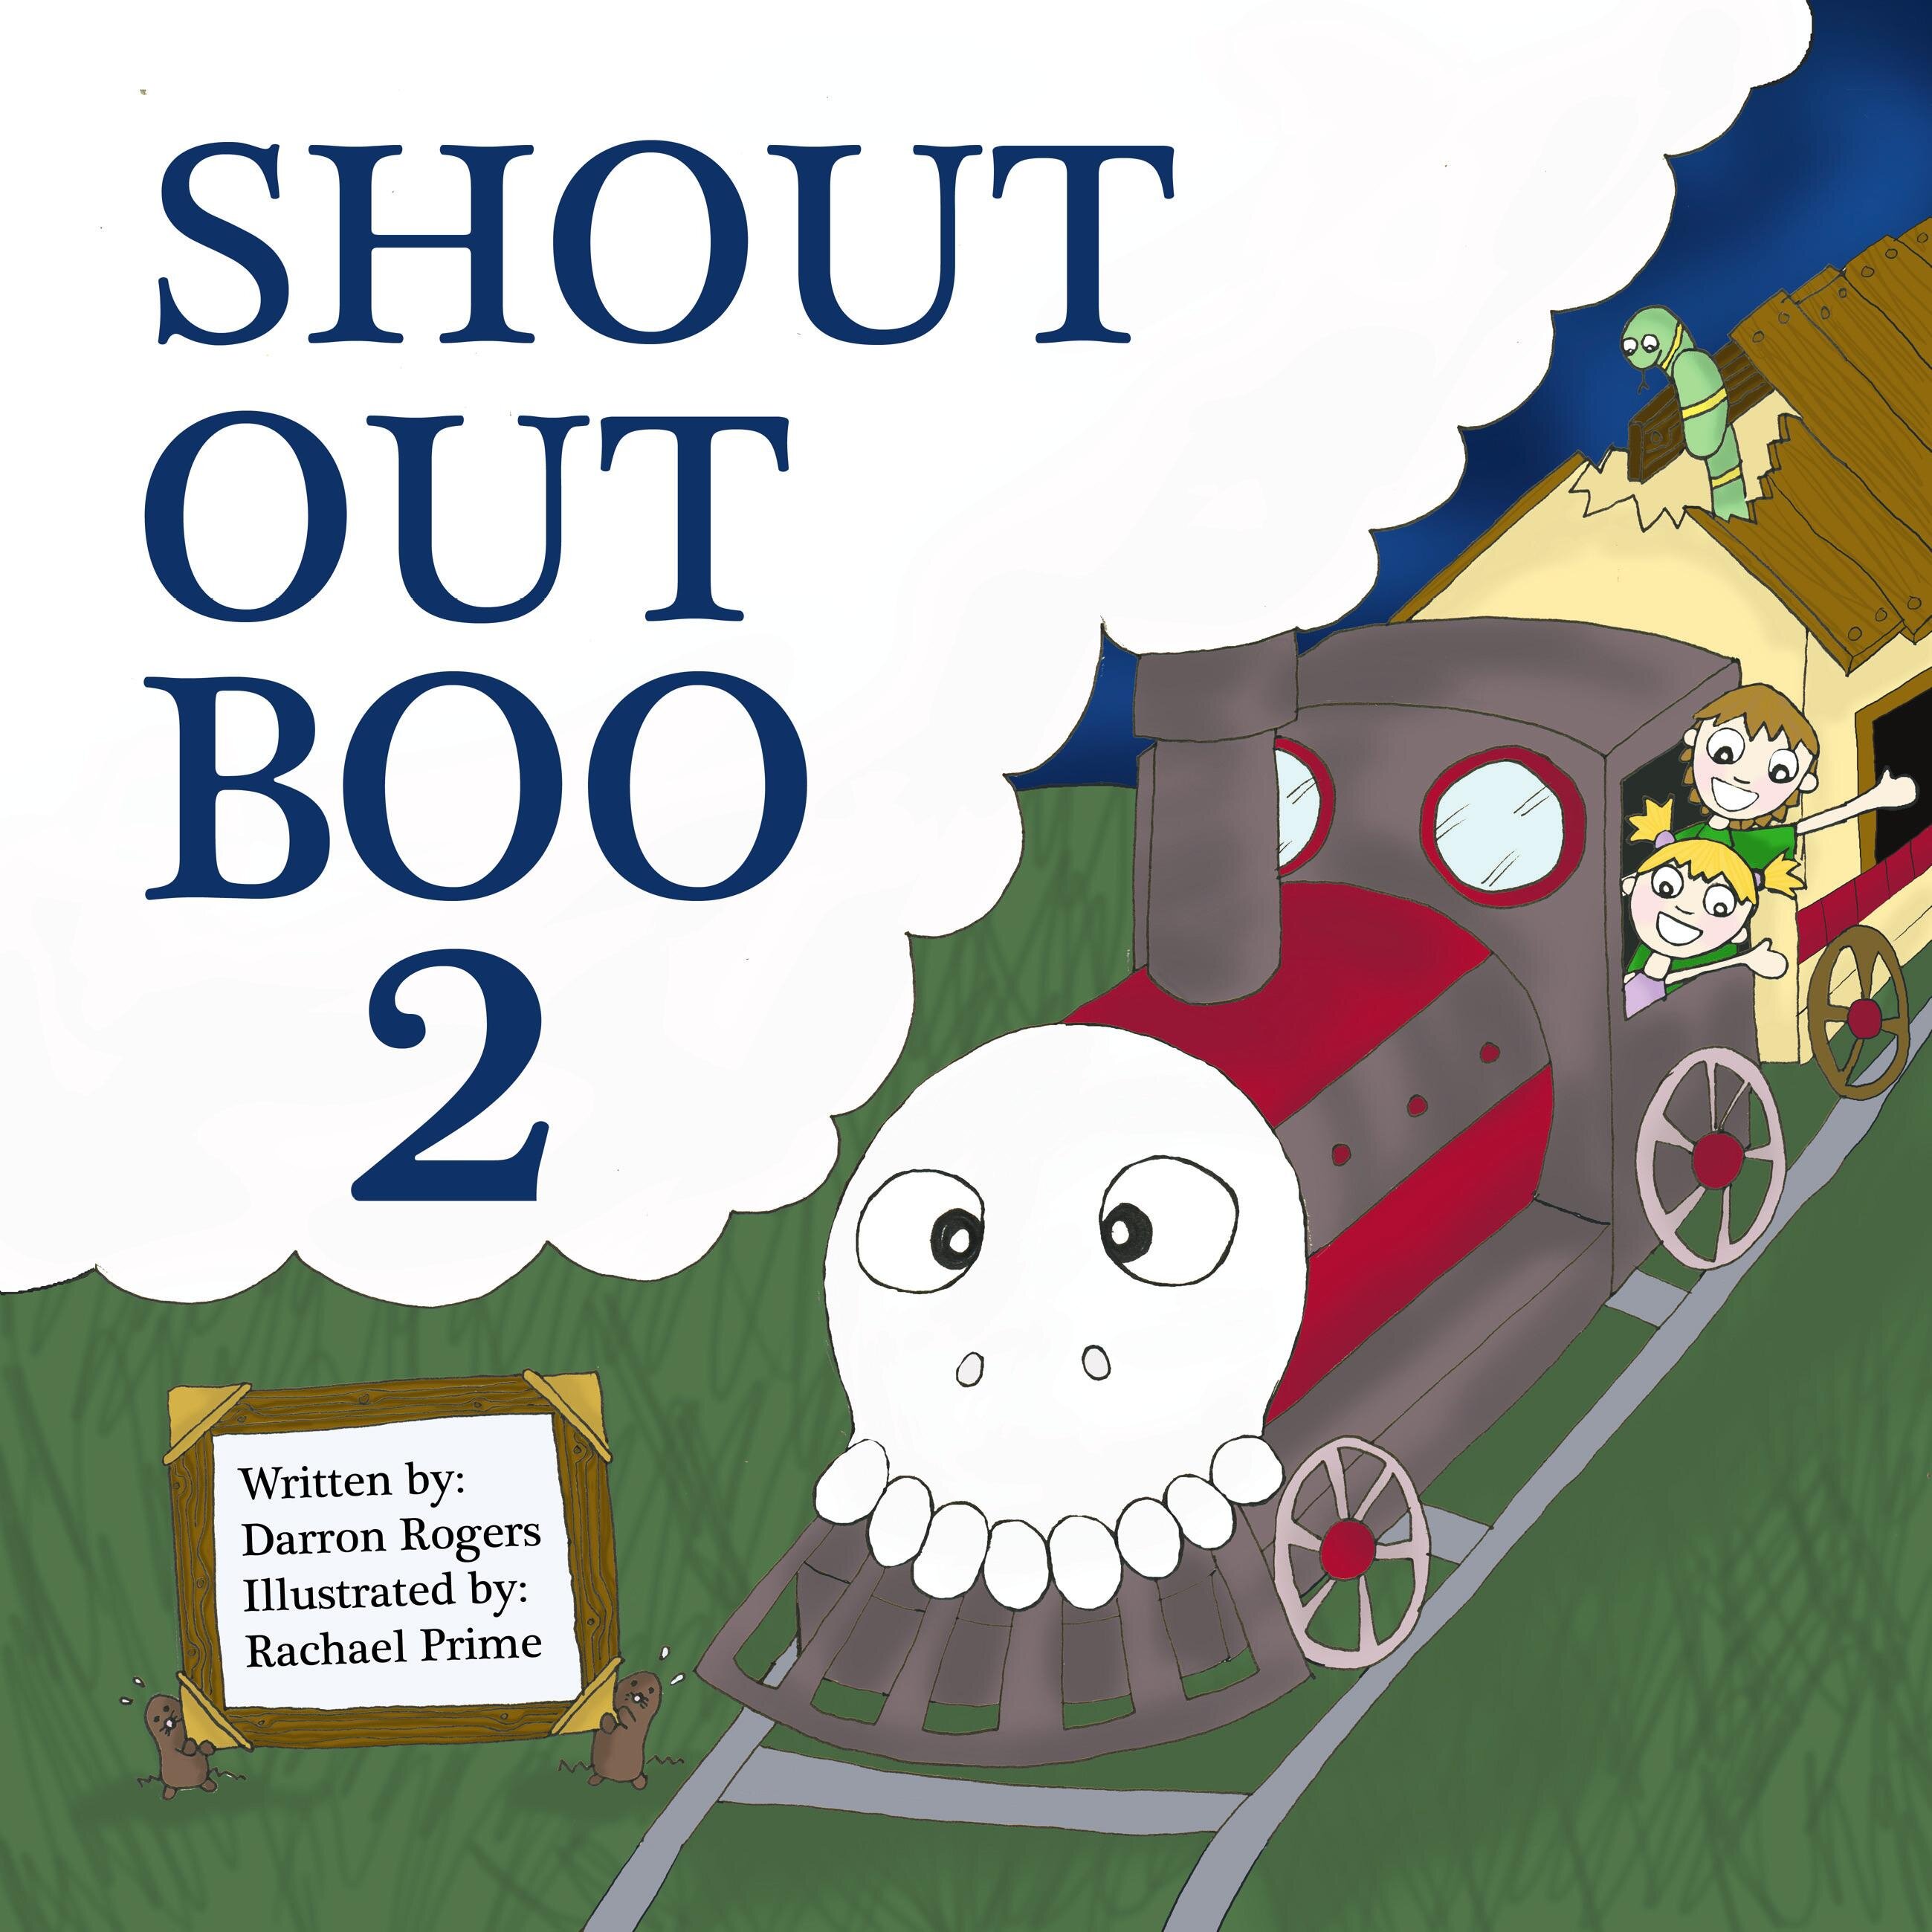 Darron Rogers, author of Shout out BOO 2! and bit time writer.